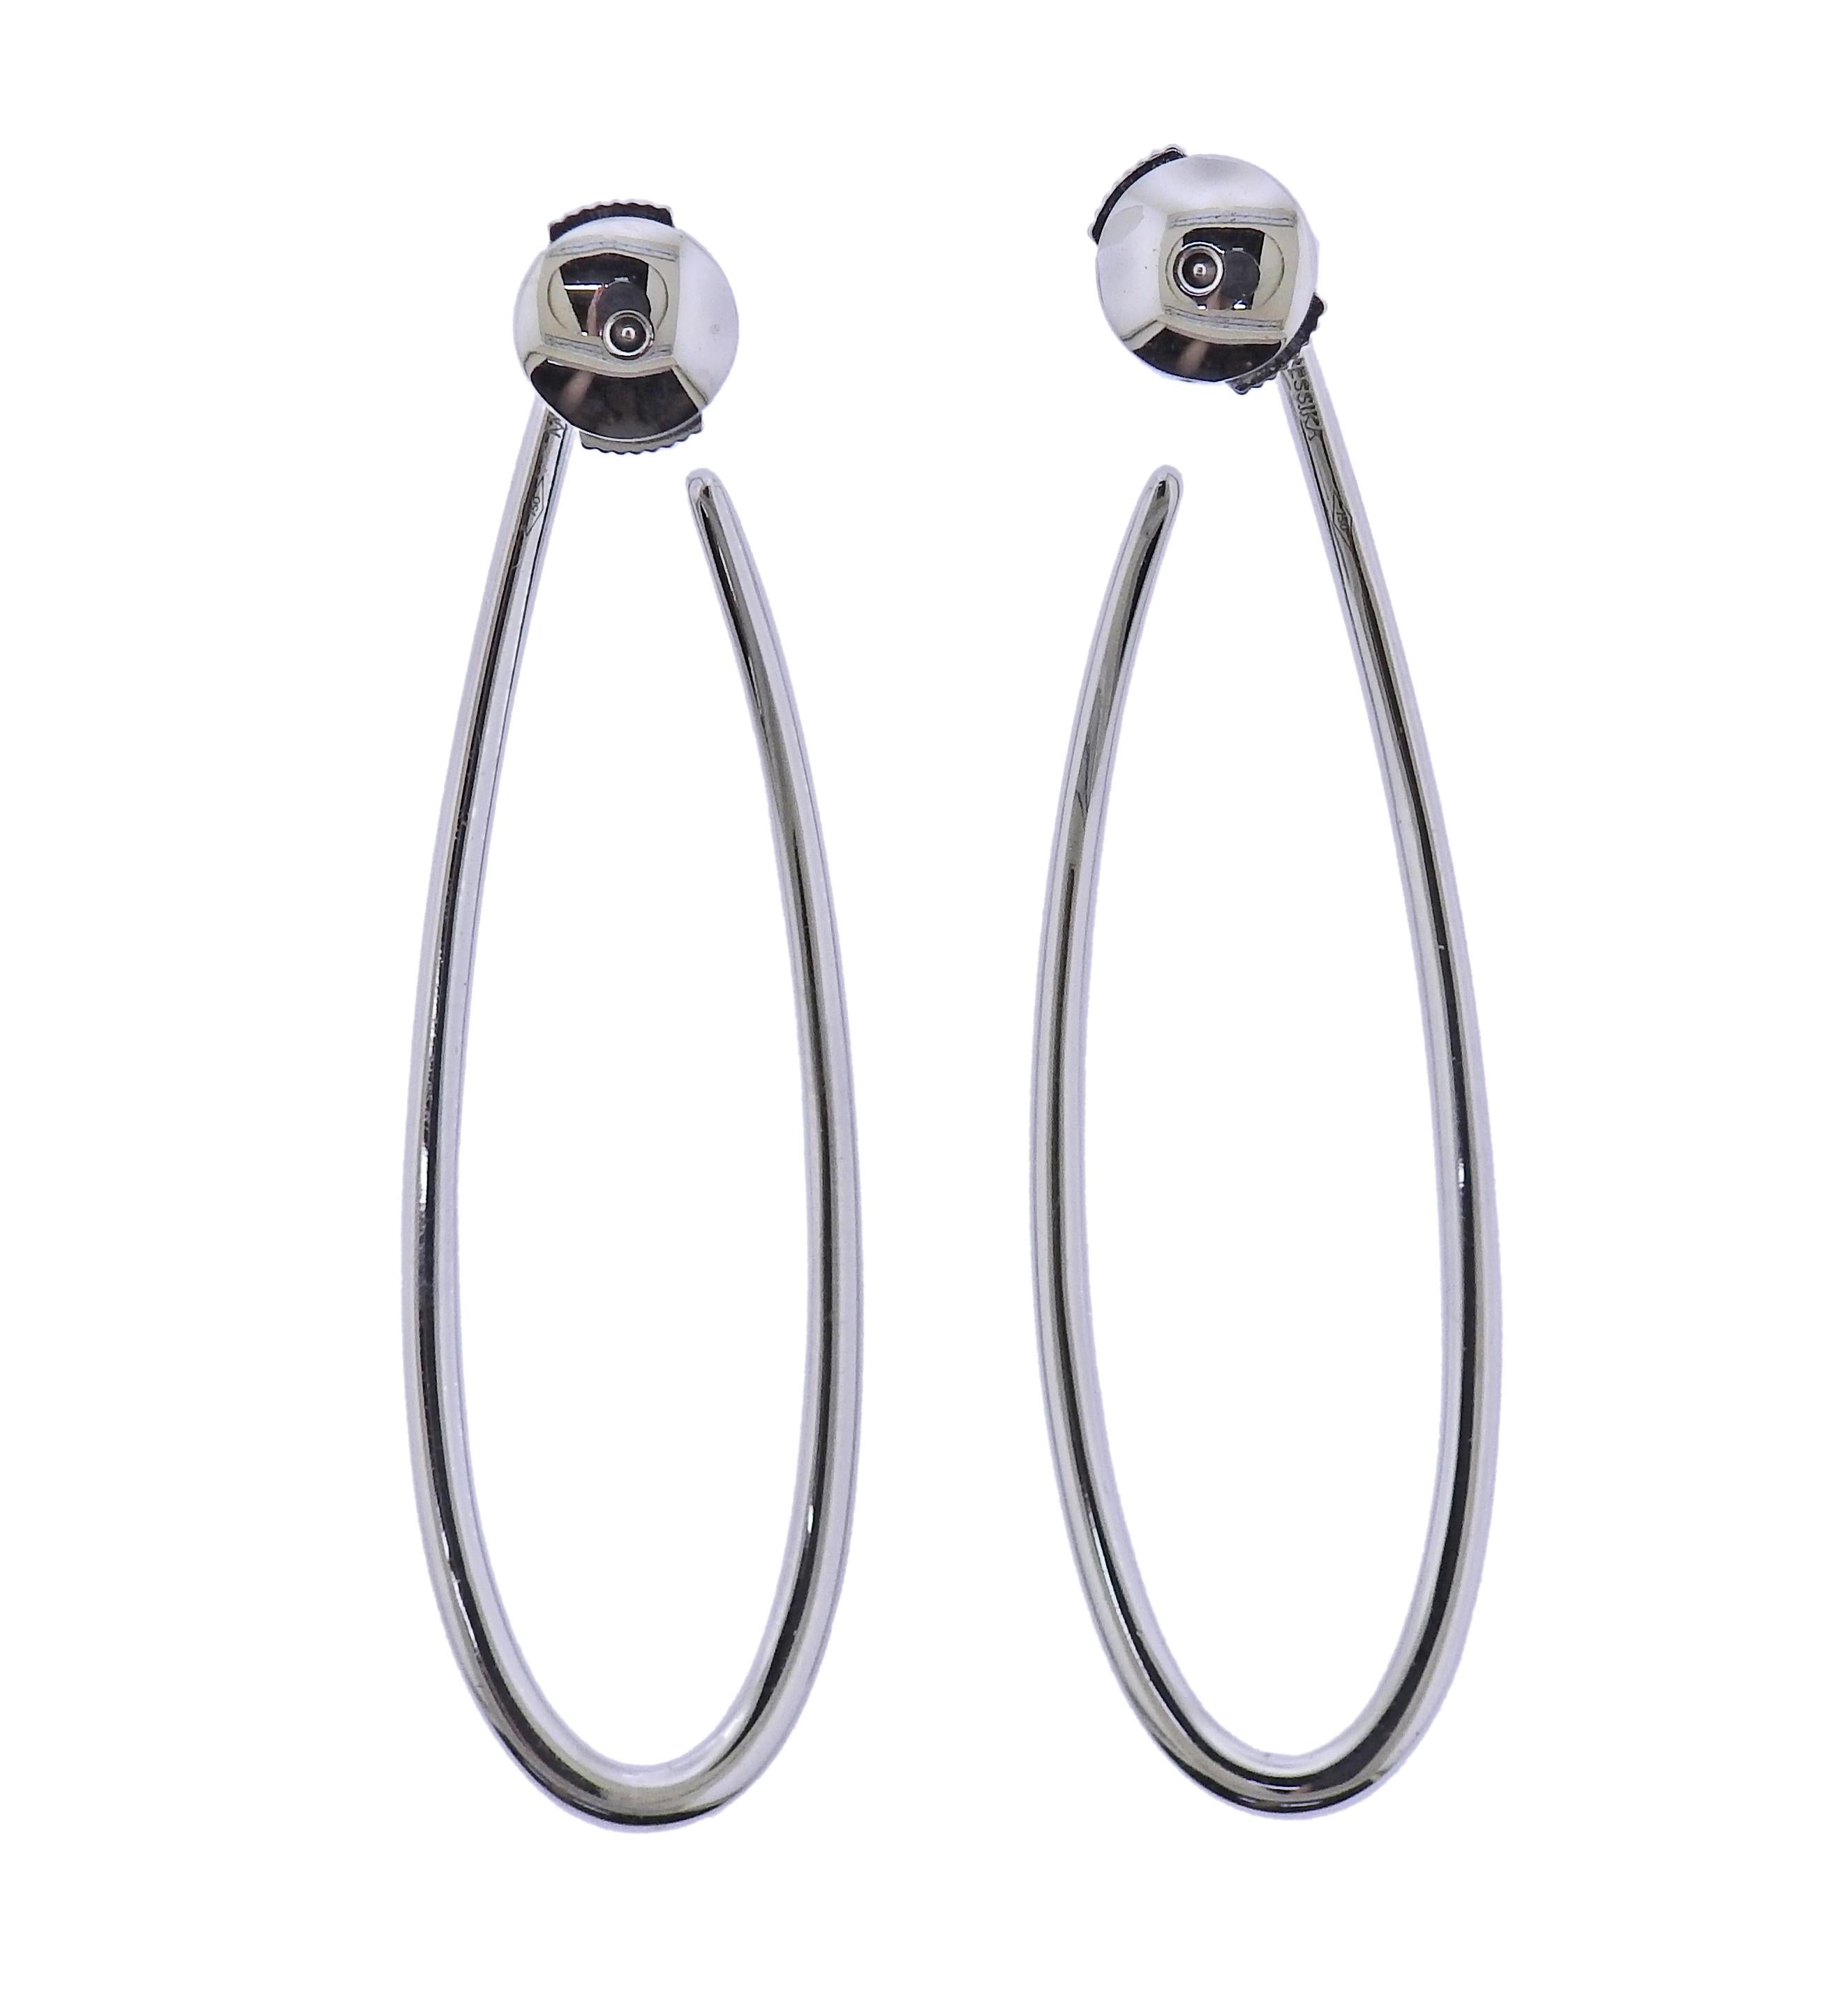 18k white gold Gatsby earrings by Messika, set with 1.32ctw G/VS diamonds. Retail $8640. New, store sample, comes with box.  Earrings are 50mm x 15mm. Weight - 7.5 grams. Marked: Messika, 750.